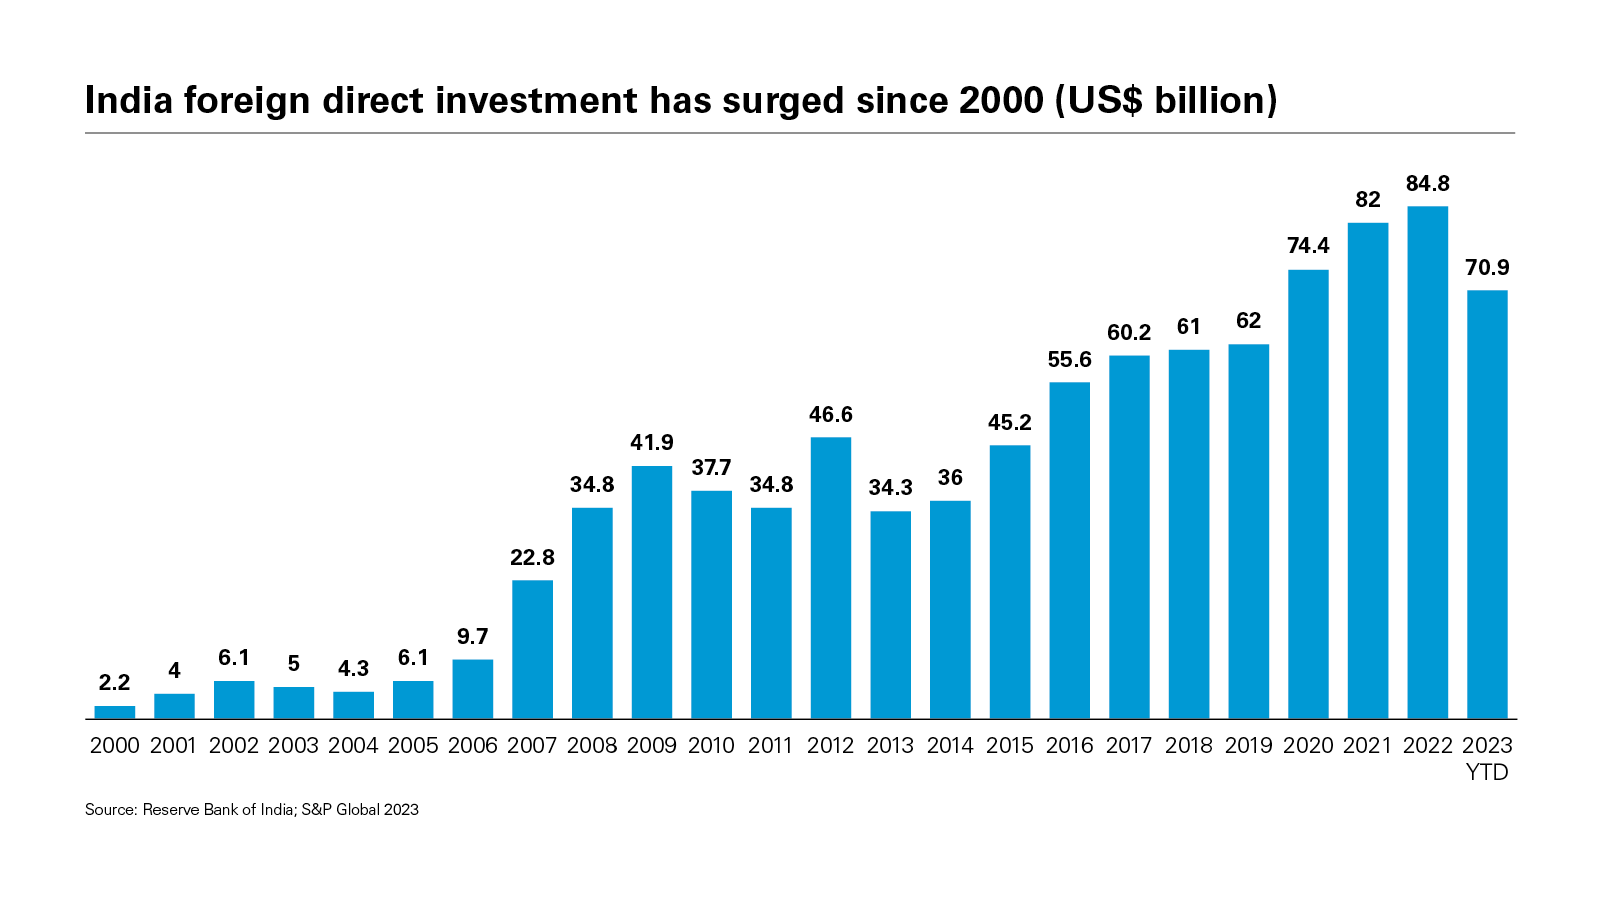 India foreign direct investment has surged since 2000 (US$ billion)